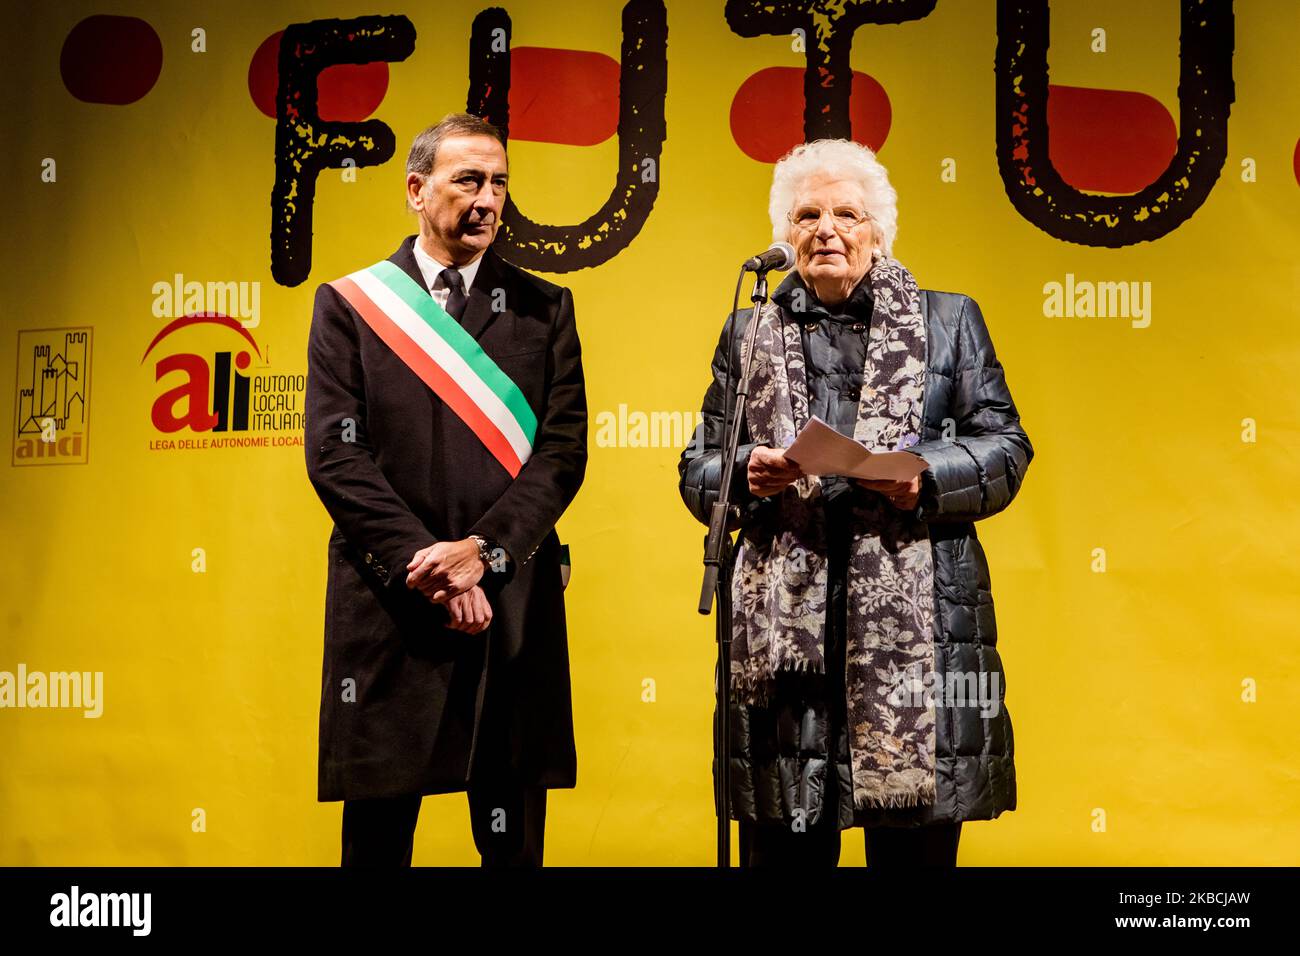 Holocaust survivor and life senator Liliana Segre (L) and Milan Mayor Giuseppe Sala during the march 'L'odio NON HA Futuro' on December 10 2019 in Milan, Italy. More than 600 mayors and councillors joined the procession that crossed the entire Piazza del Duomo in Milan and ended in Piazza della Scala where Liliana Segre spoke for a public intervention against the hatred that is increasing in Italy and Europe. (Photo by Mairo Cinquetti/NurPhoto) Stock Photo